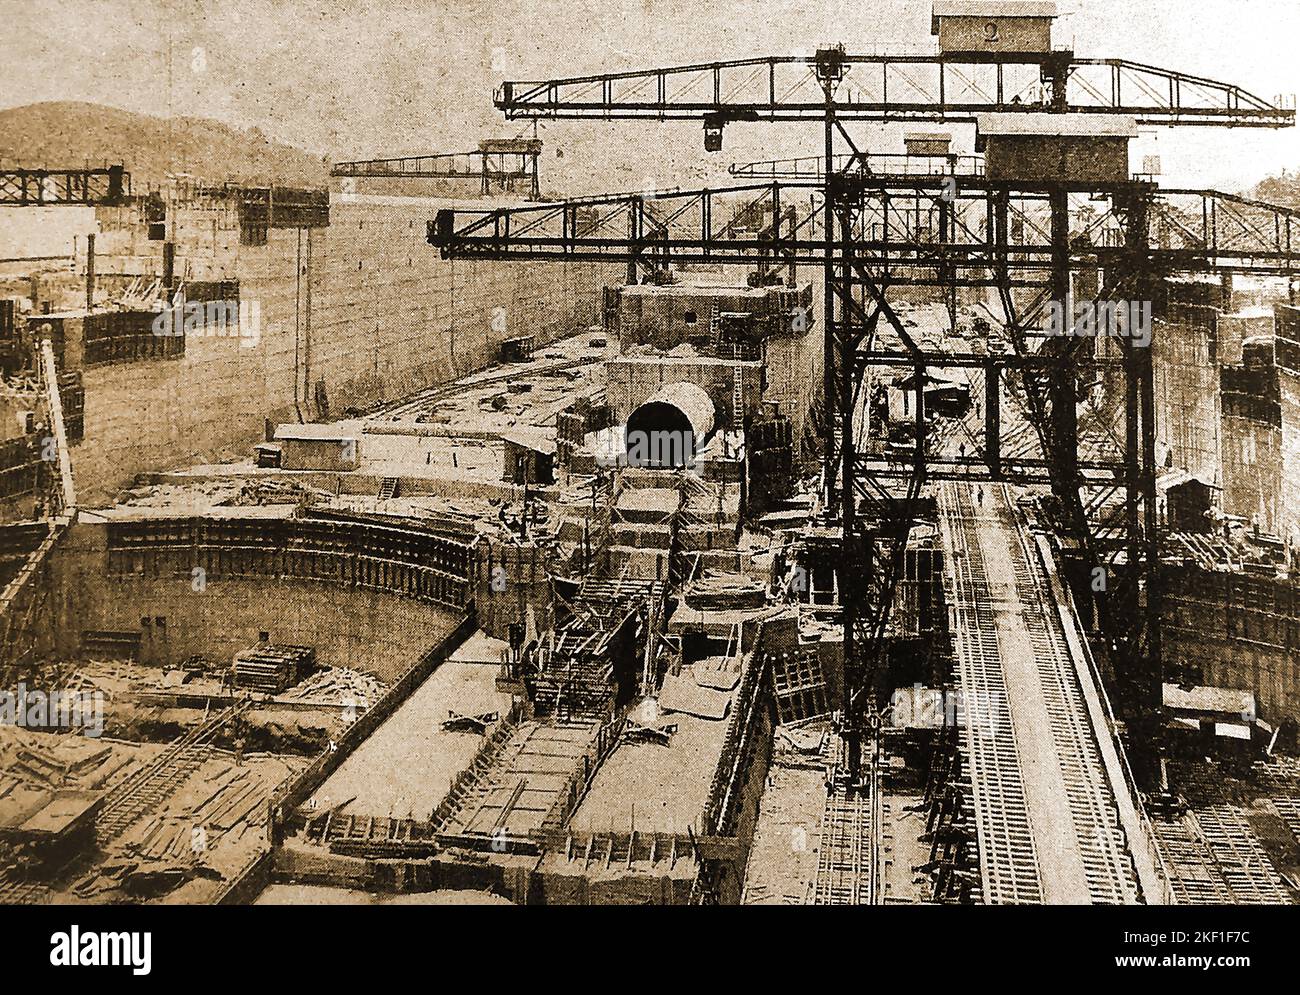 PANAMA CANAL - An old photograph taken during the construction of the Miraflores Lock on the Panama Canal. Stock Photo